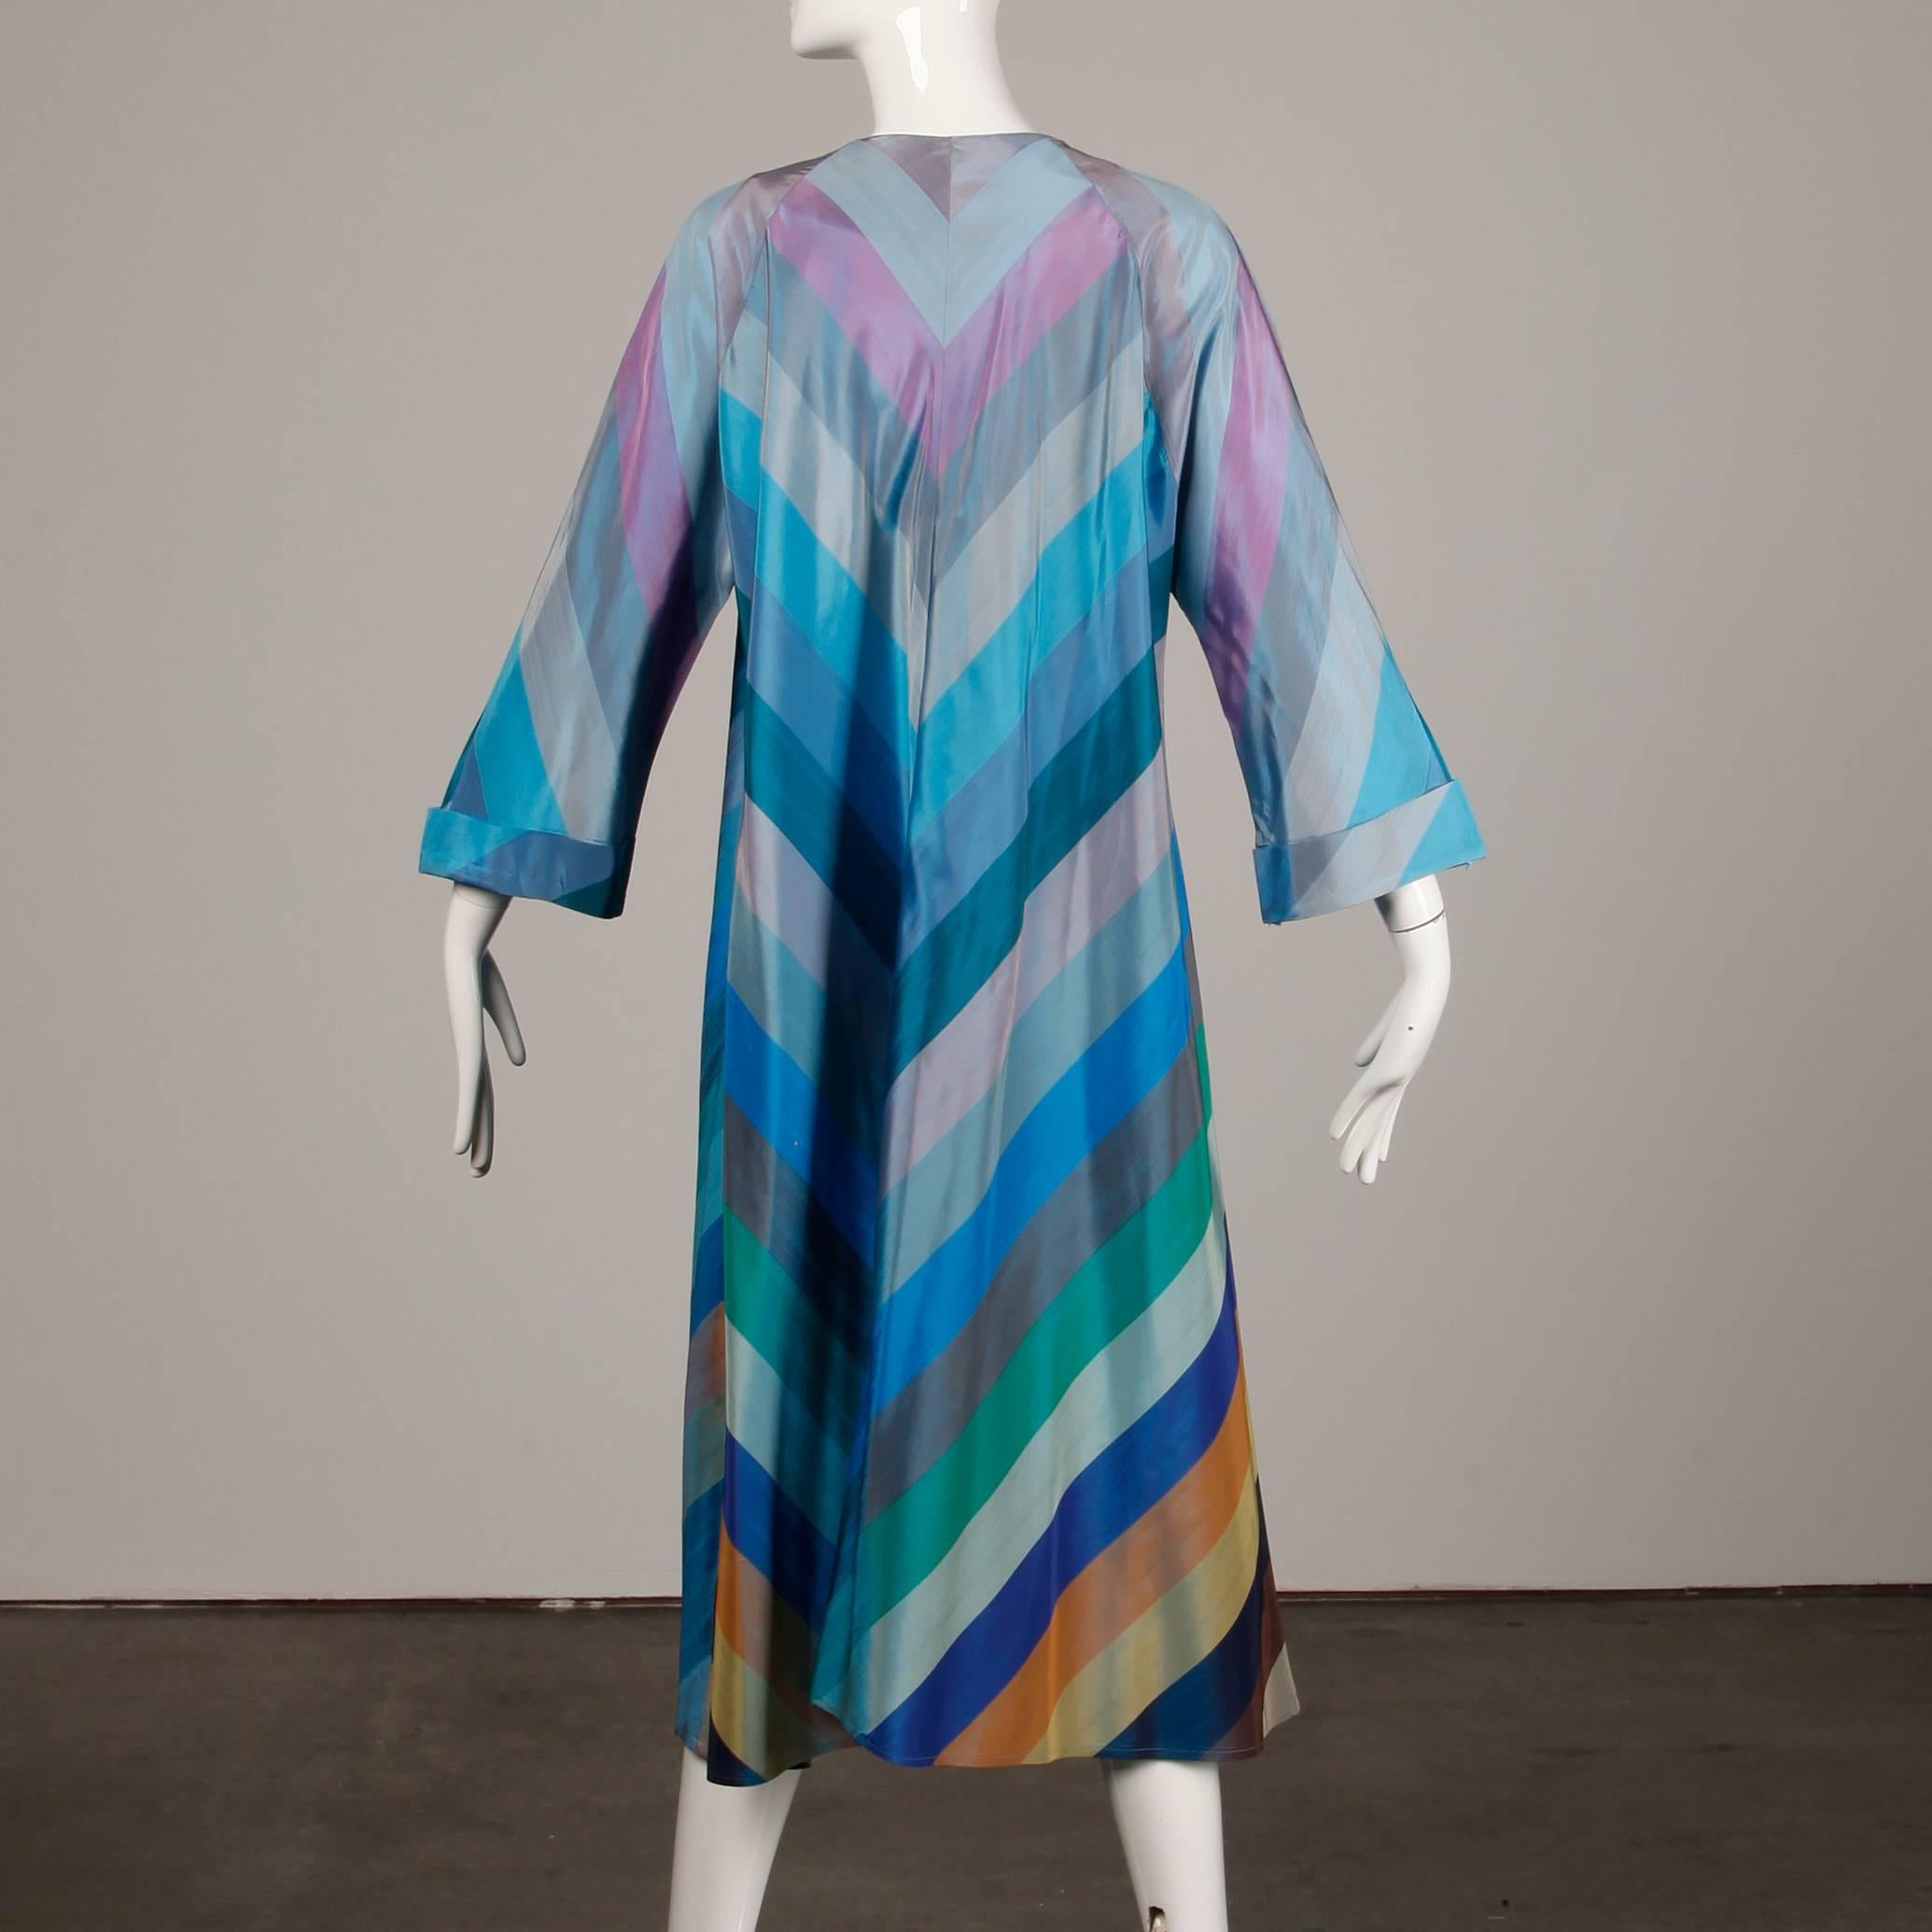 1940s Vintage Taffeta Rainbow Striped Chevron Light Weight Duster Coat or Robe In Excellent Condition For Sale In Sparks, NV